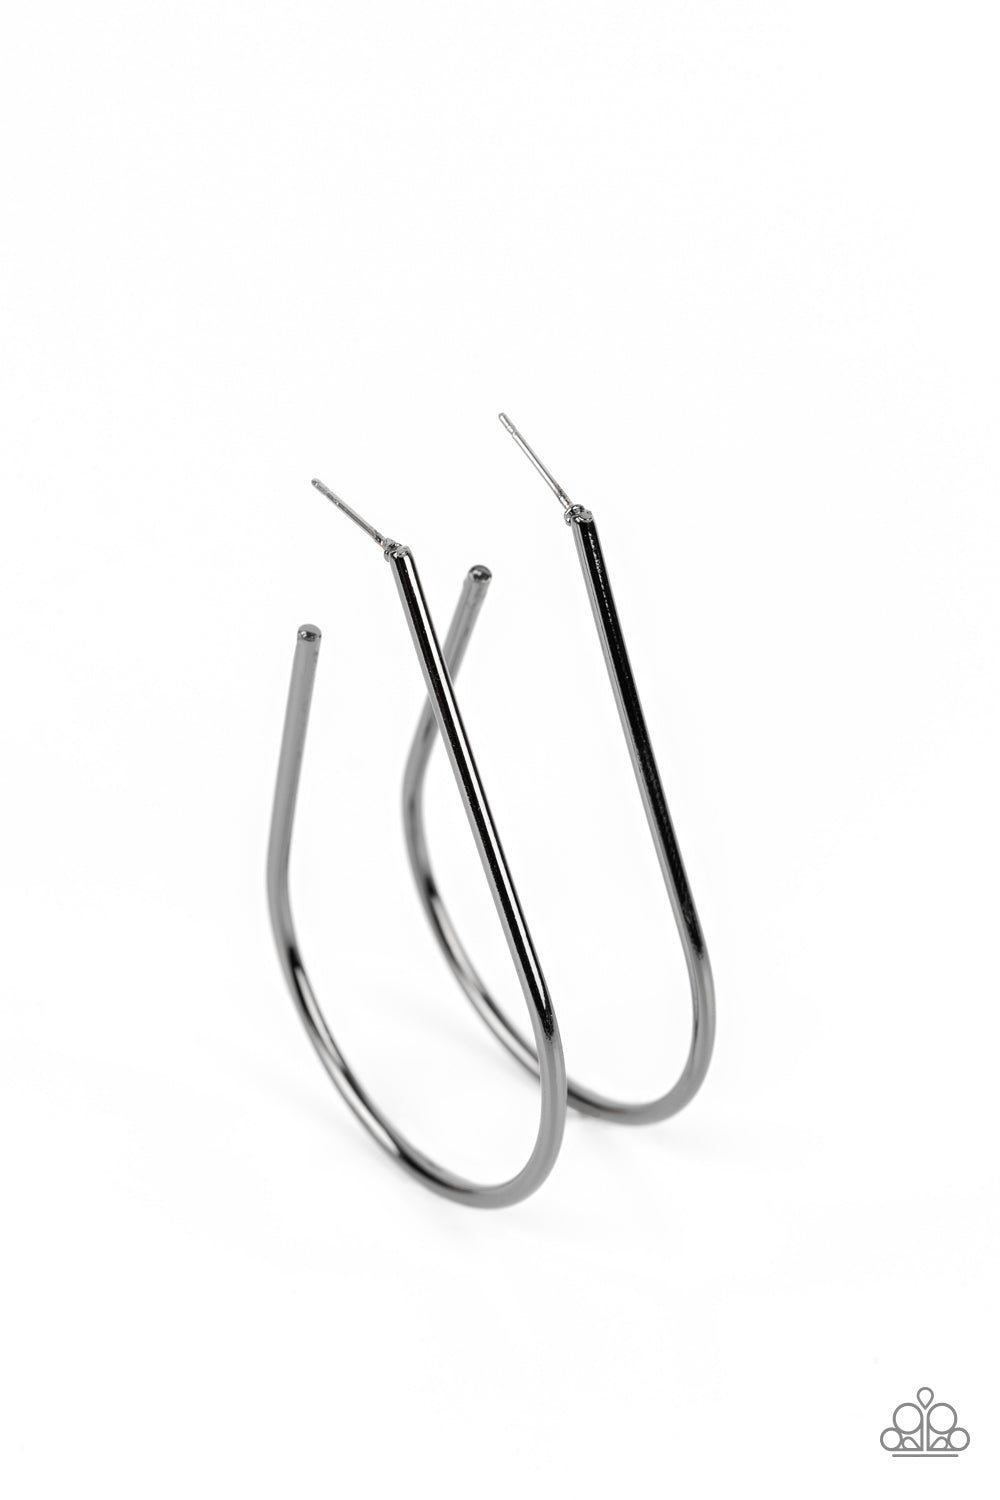 &lt;P&gt;A glistening gunmetal bar sleekly curls into an elongated hoop for a chic look. Earring attaches to a standard post fitting. Hoop measures approximately 1 1/2\&quot; in diameter.&lt;/P&gt;  

&lt;P&gt; &lt;I&gt;  Sold as one pair of hoop earrings. &lt;/I&gt;  &lt;/P&gt;


&lt;img src=\&quot;https://d9b54x484lq62.cloudfront.net/paparazzi/shopping/images/517_tag150x115_1.png\&quot; alt=\&quot;New Kit\&quot; align=\&quot;middle\&quot; height=\&quot;50\&quot; width=\&quot;50\&quot;/&gt;